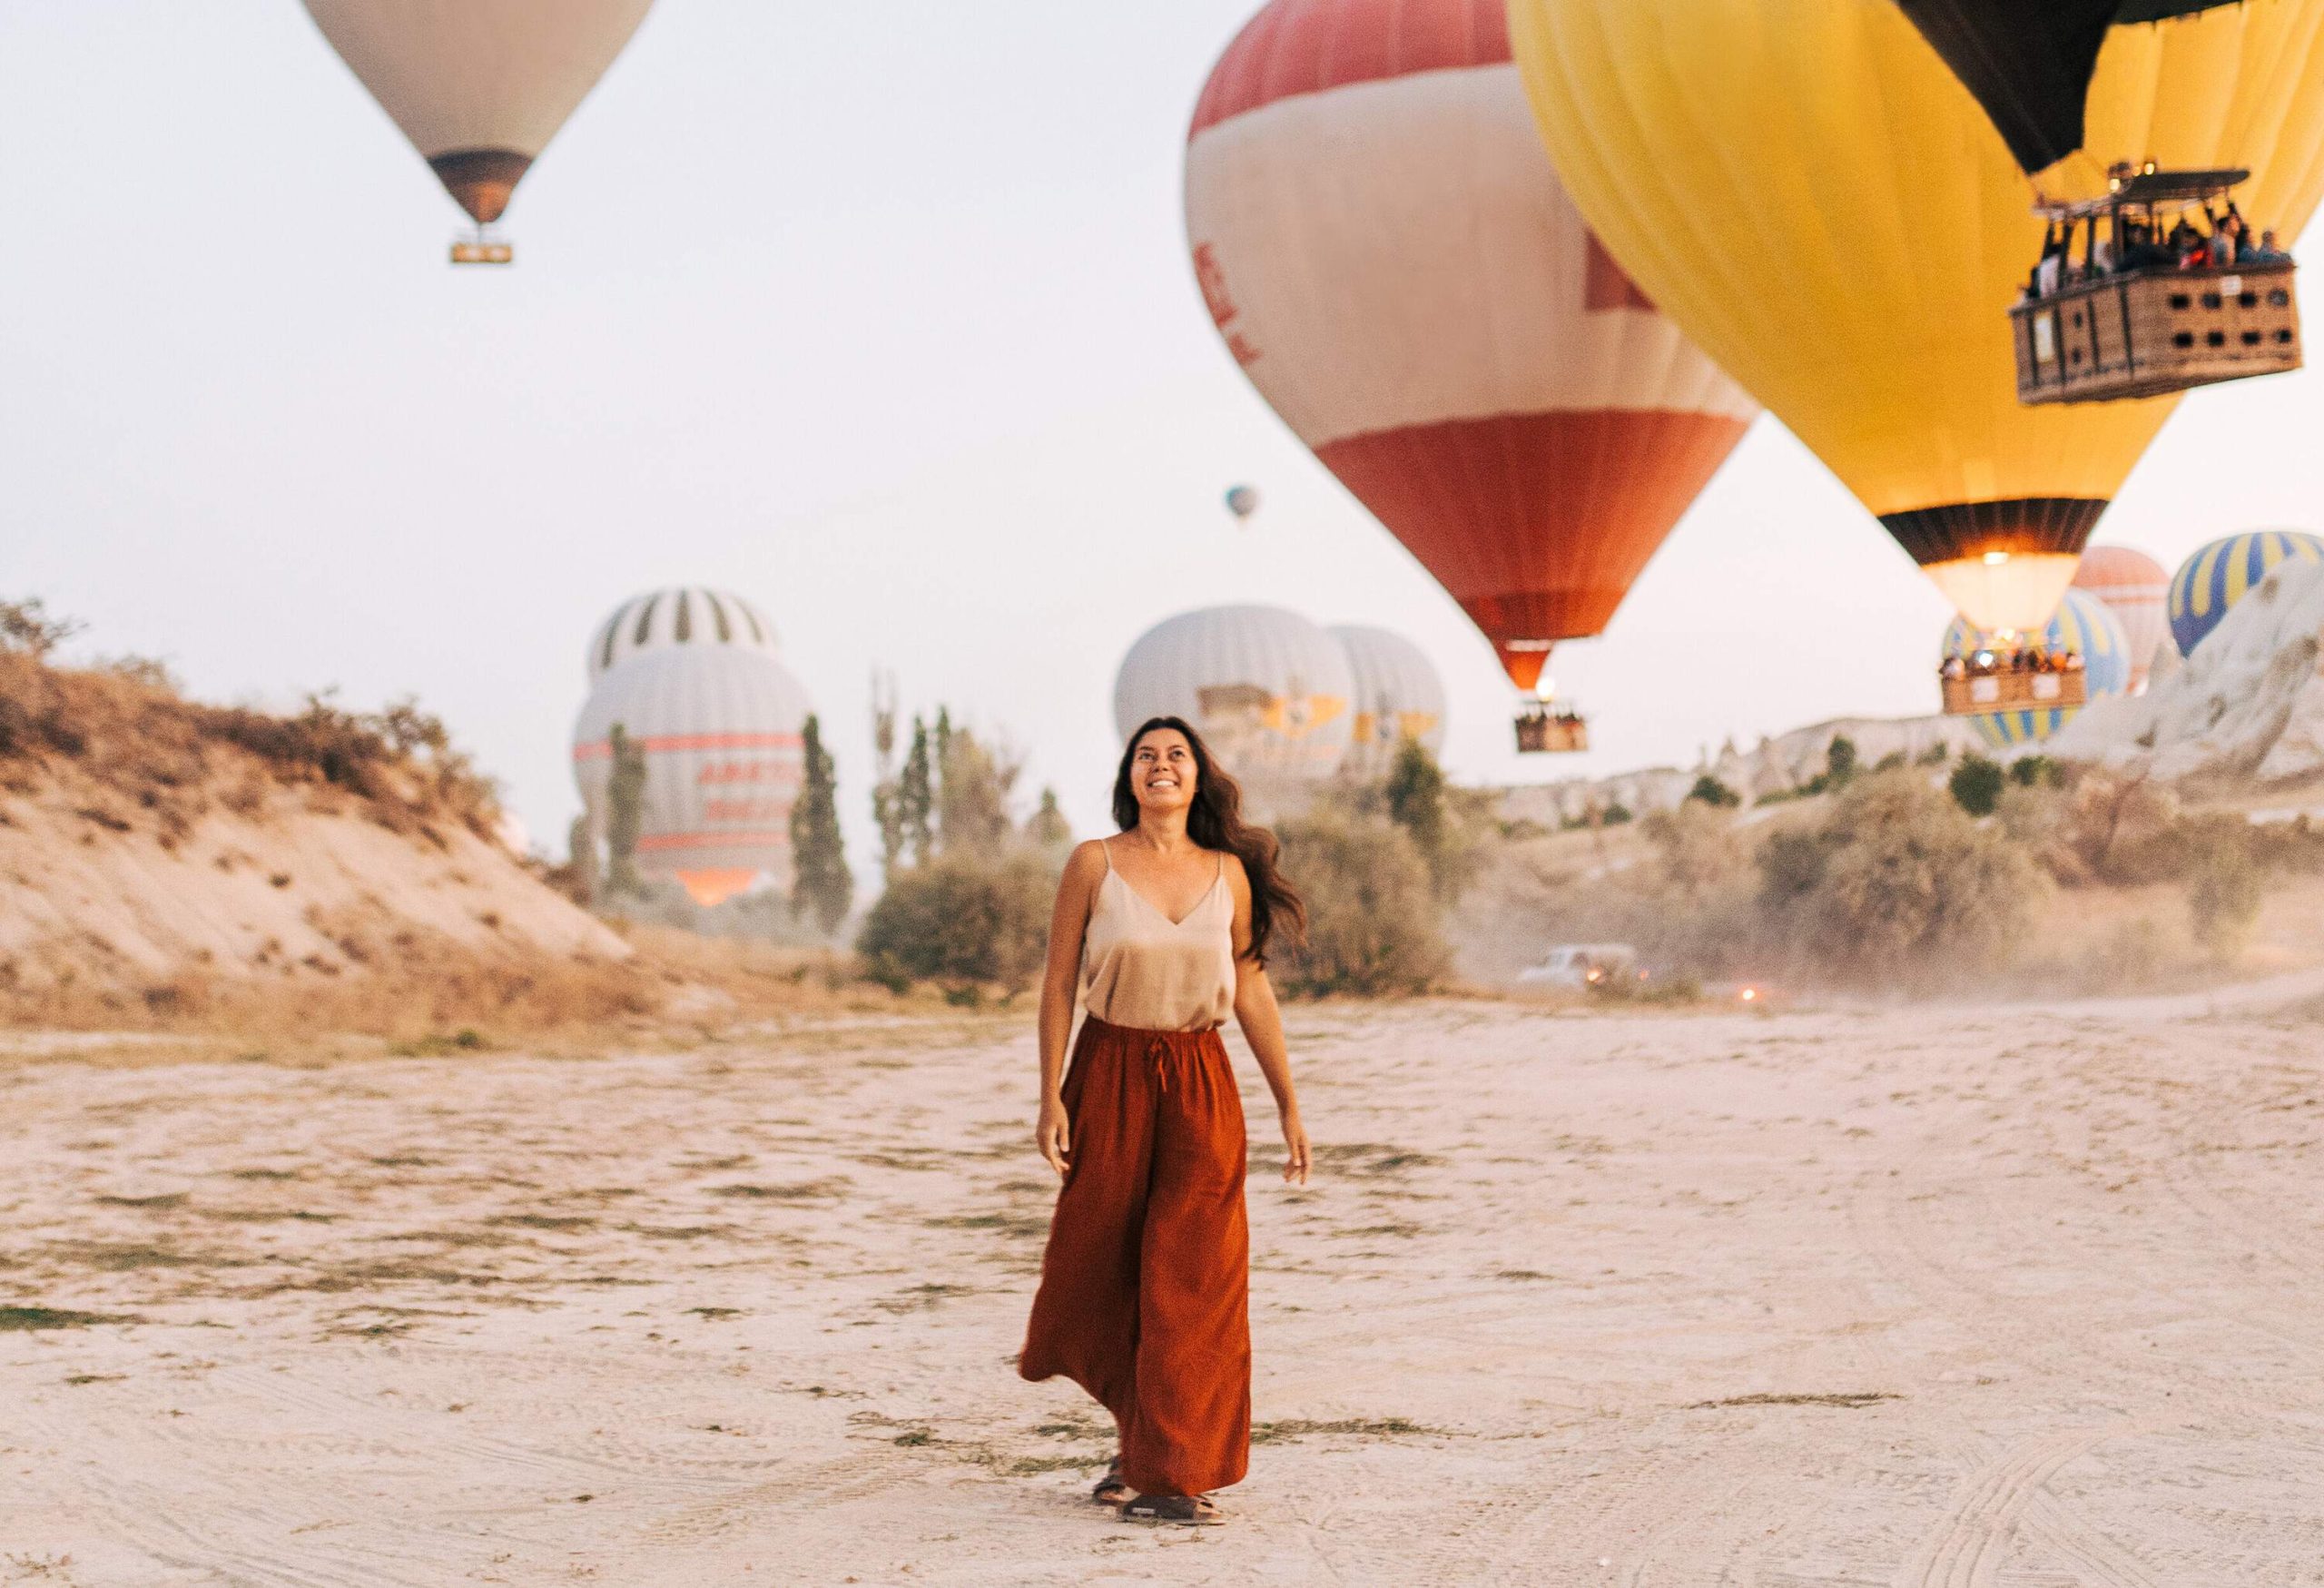 dest_turkey_cappadocia_hot-air-balloons_gettyimages-1419516052_universal_within-usage-period_98457